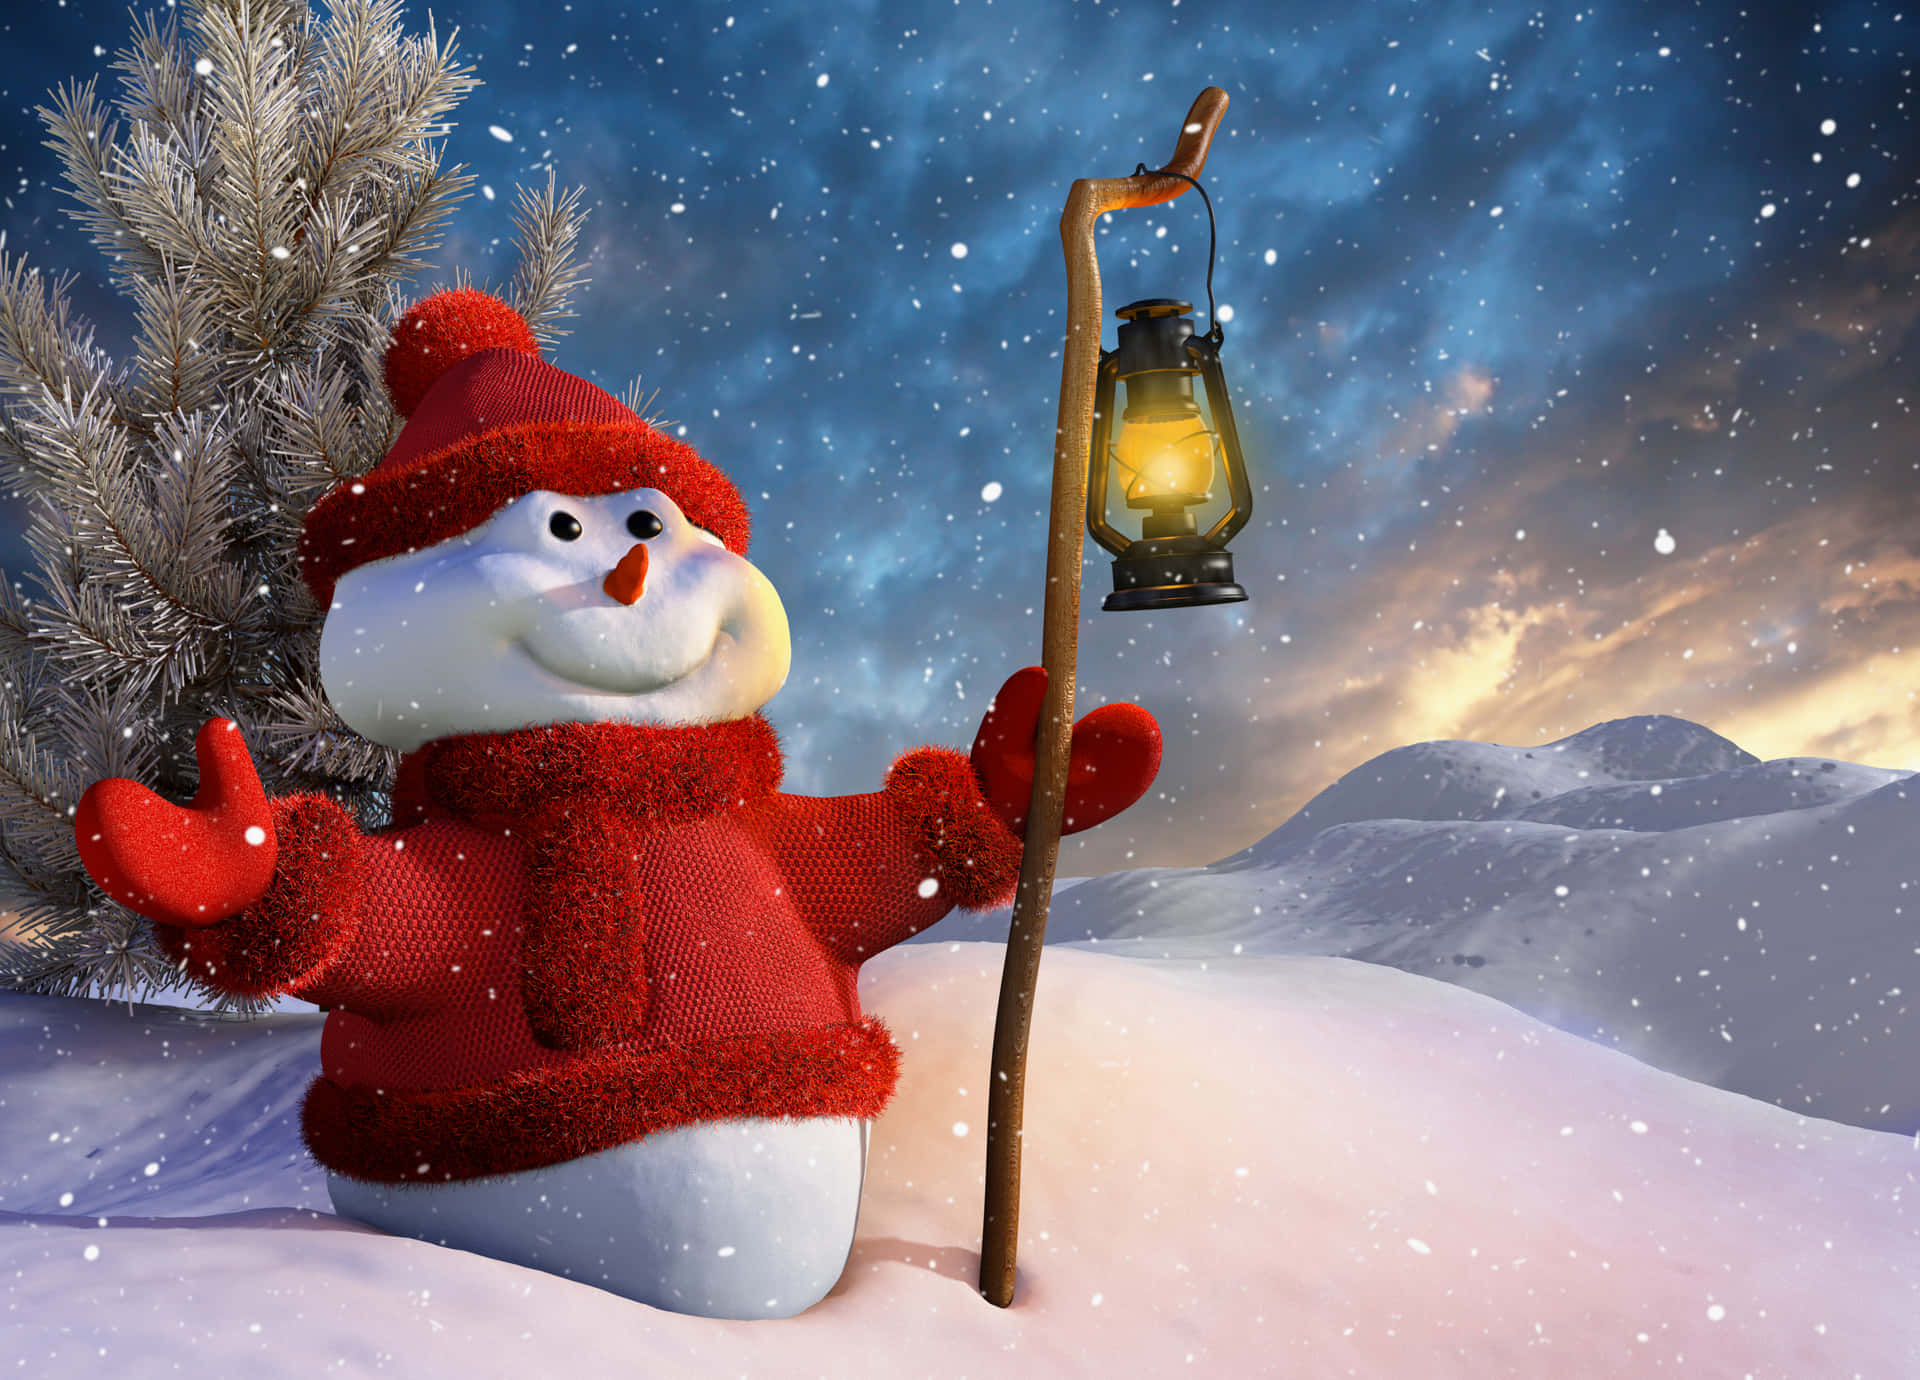 Enjoy the winter season with this magical snowman!